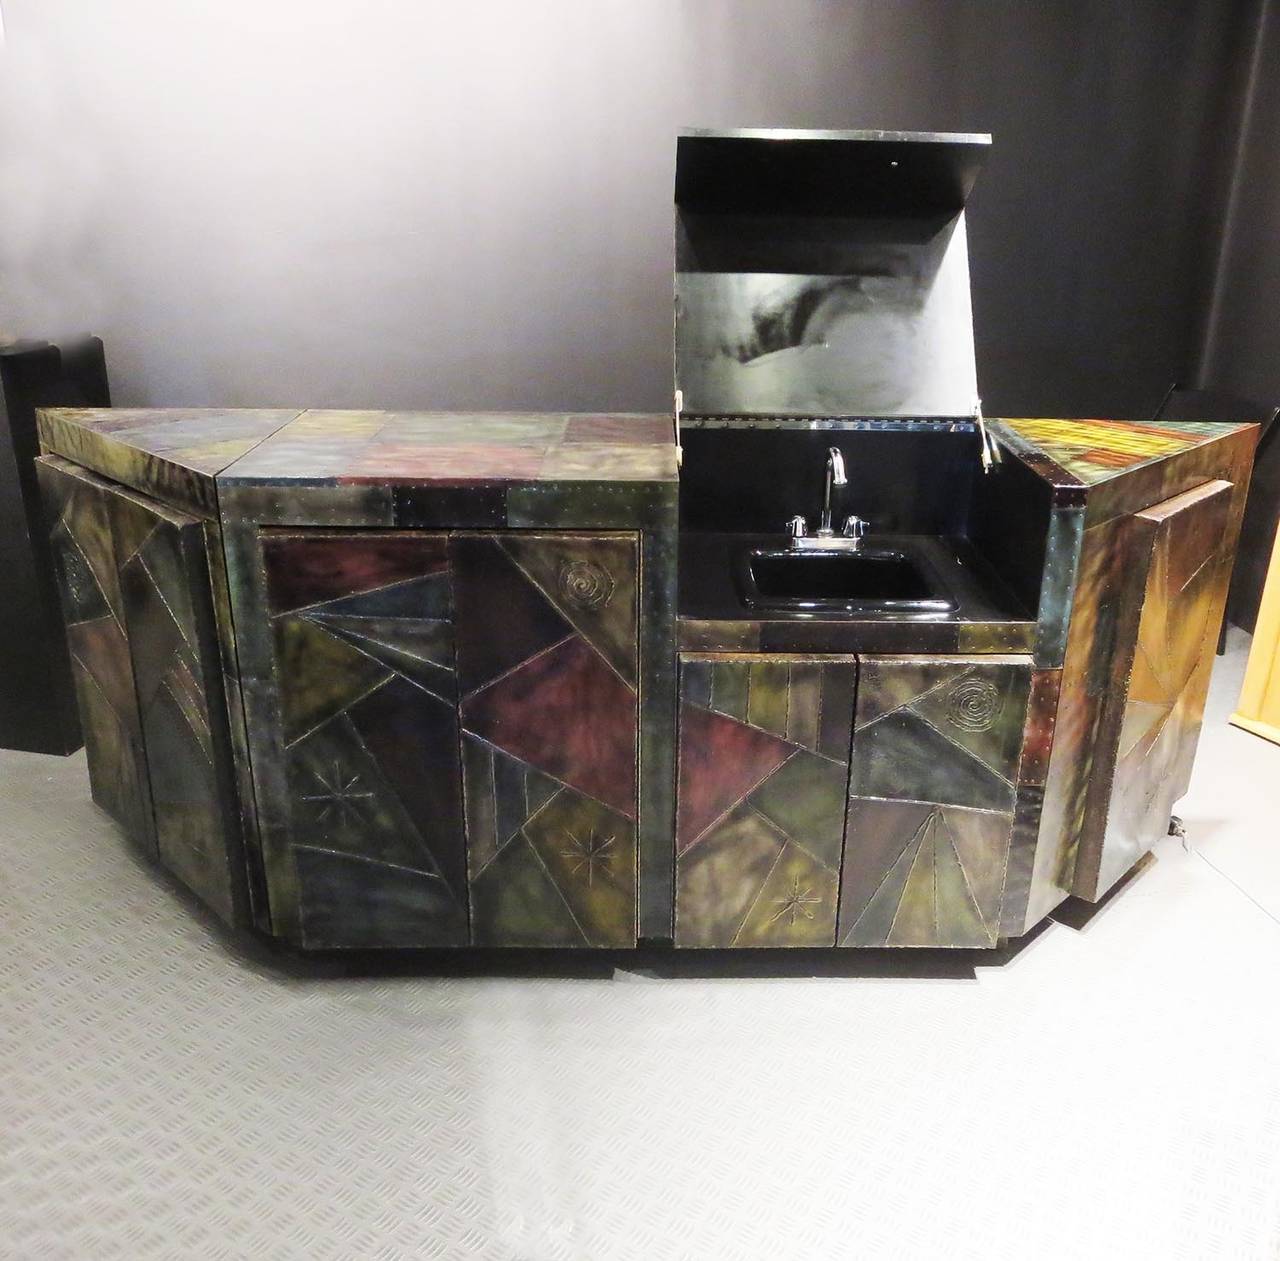 Custom bar with patchwork polychrome finish and riveted and welded decoration consisting of three base units, one with integrated wet sink and cabinetry. All surfaces, including the back wall, are surfaced with multicolored steel panels in a